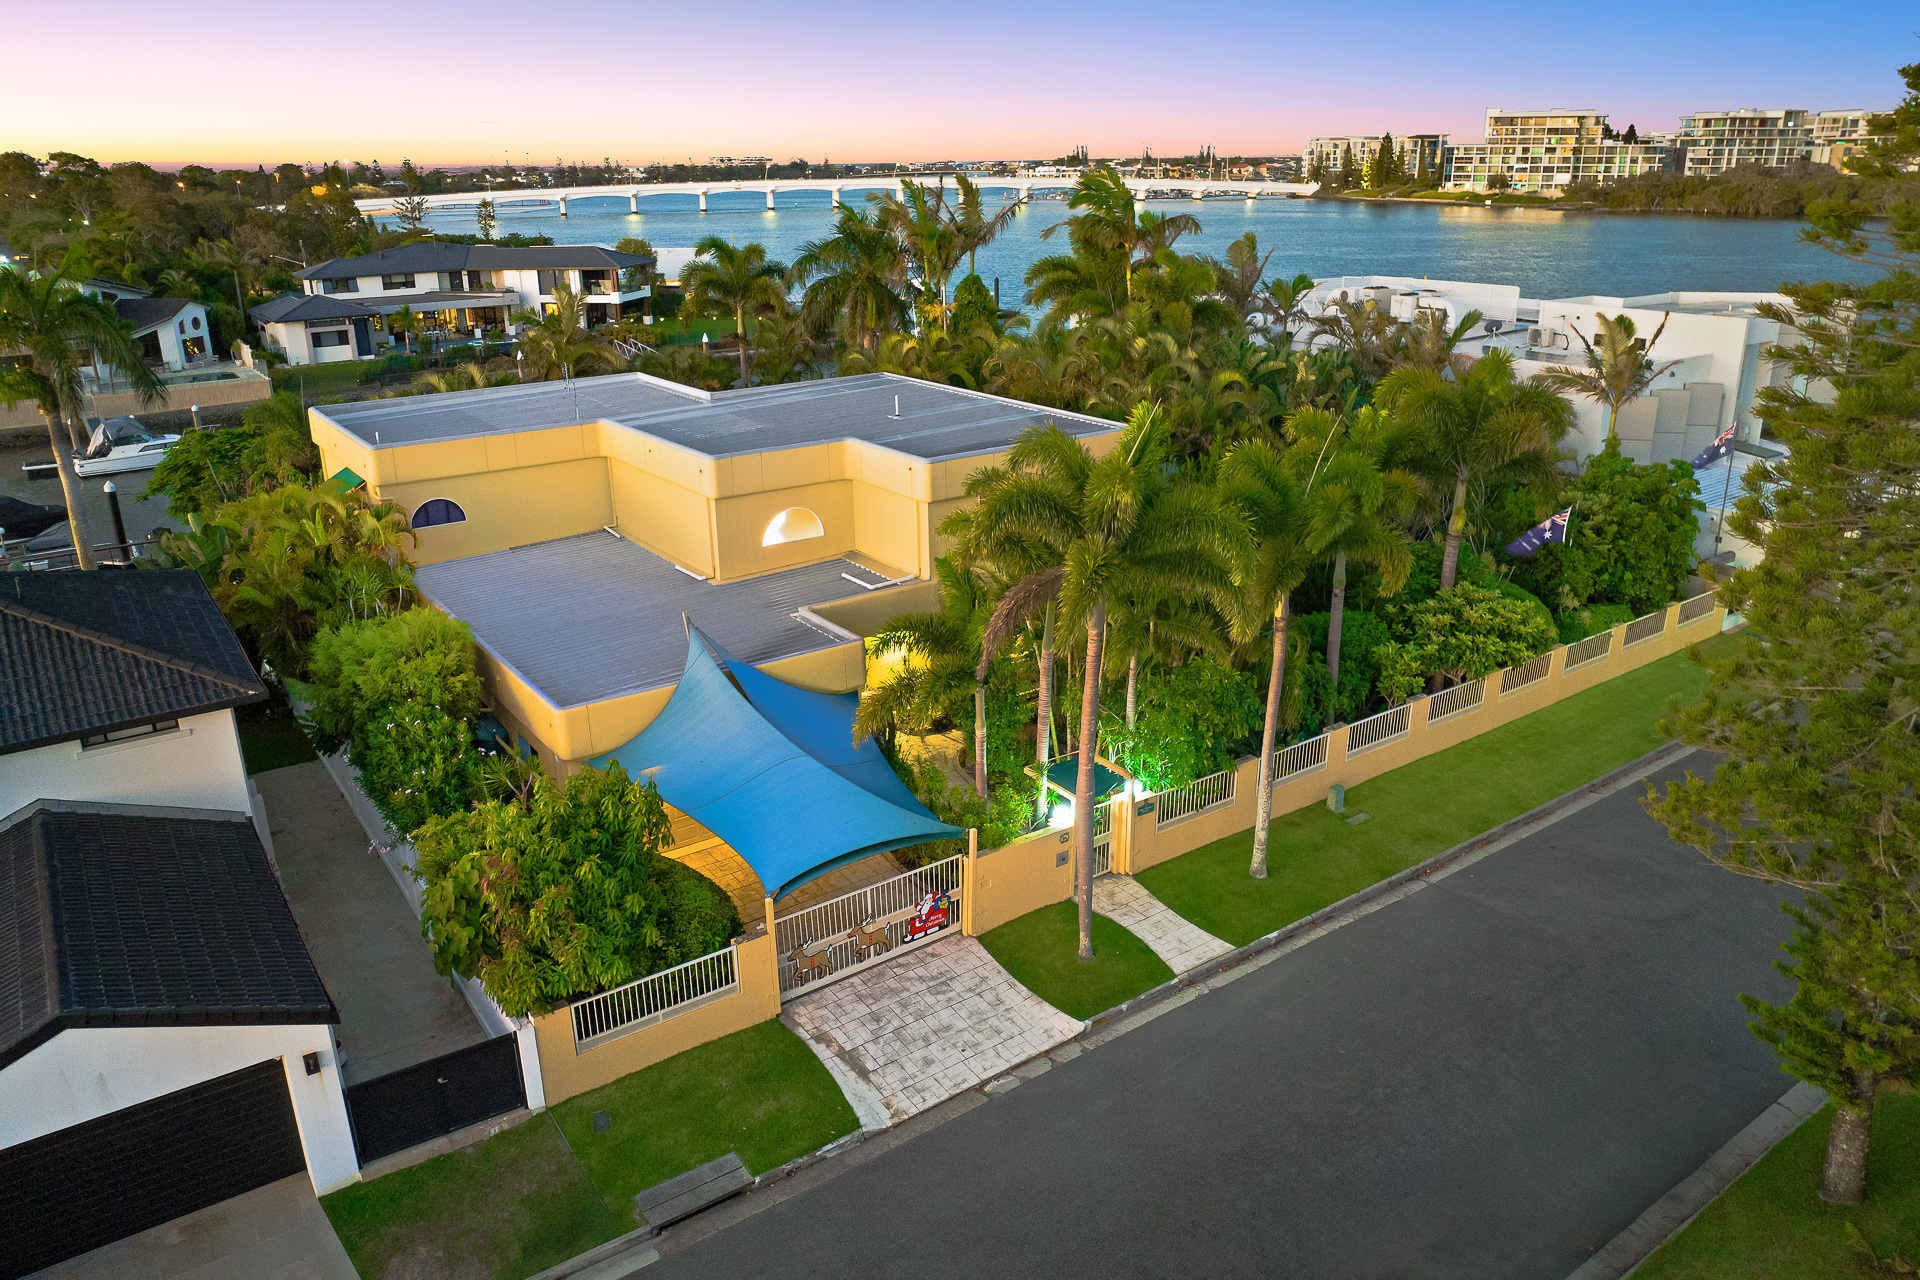 Record Sale Price for Northern Gold Coast Suburb